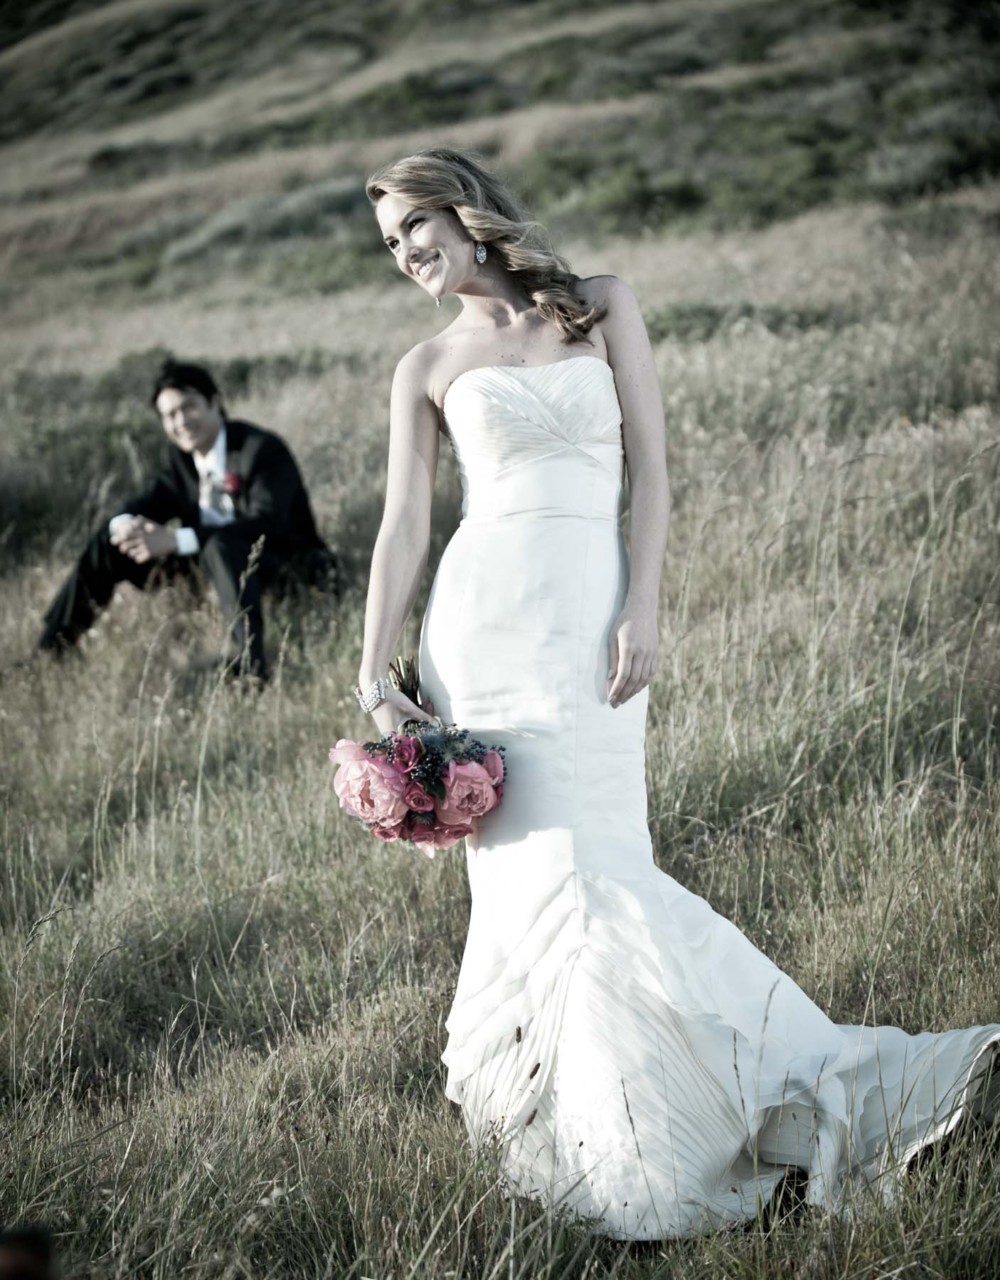 Looking for a local wedding photographer in Palmer?